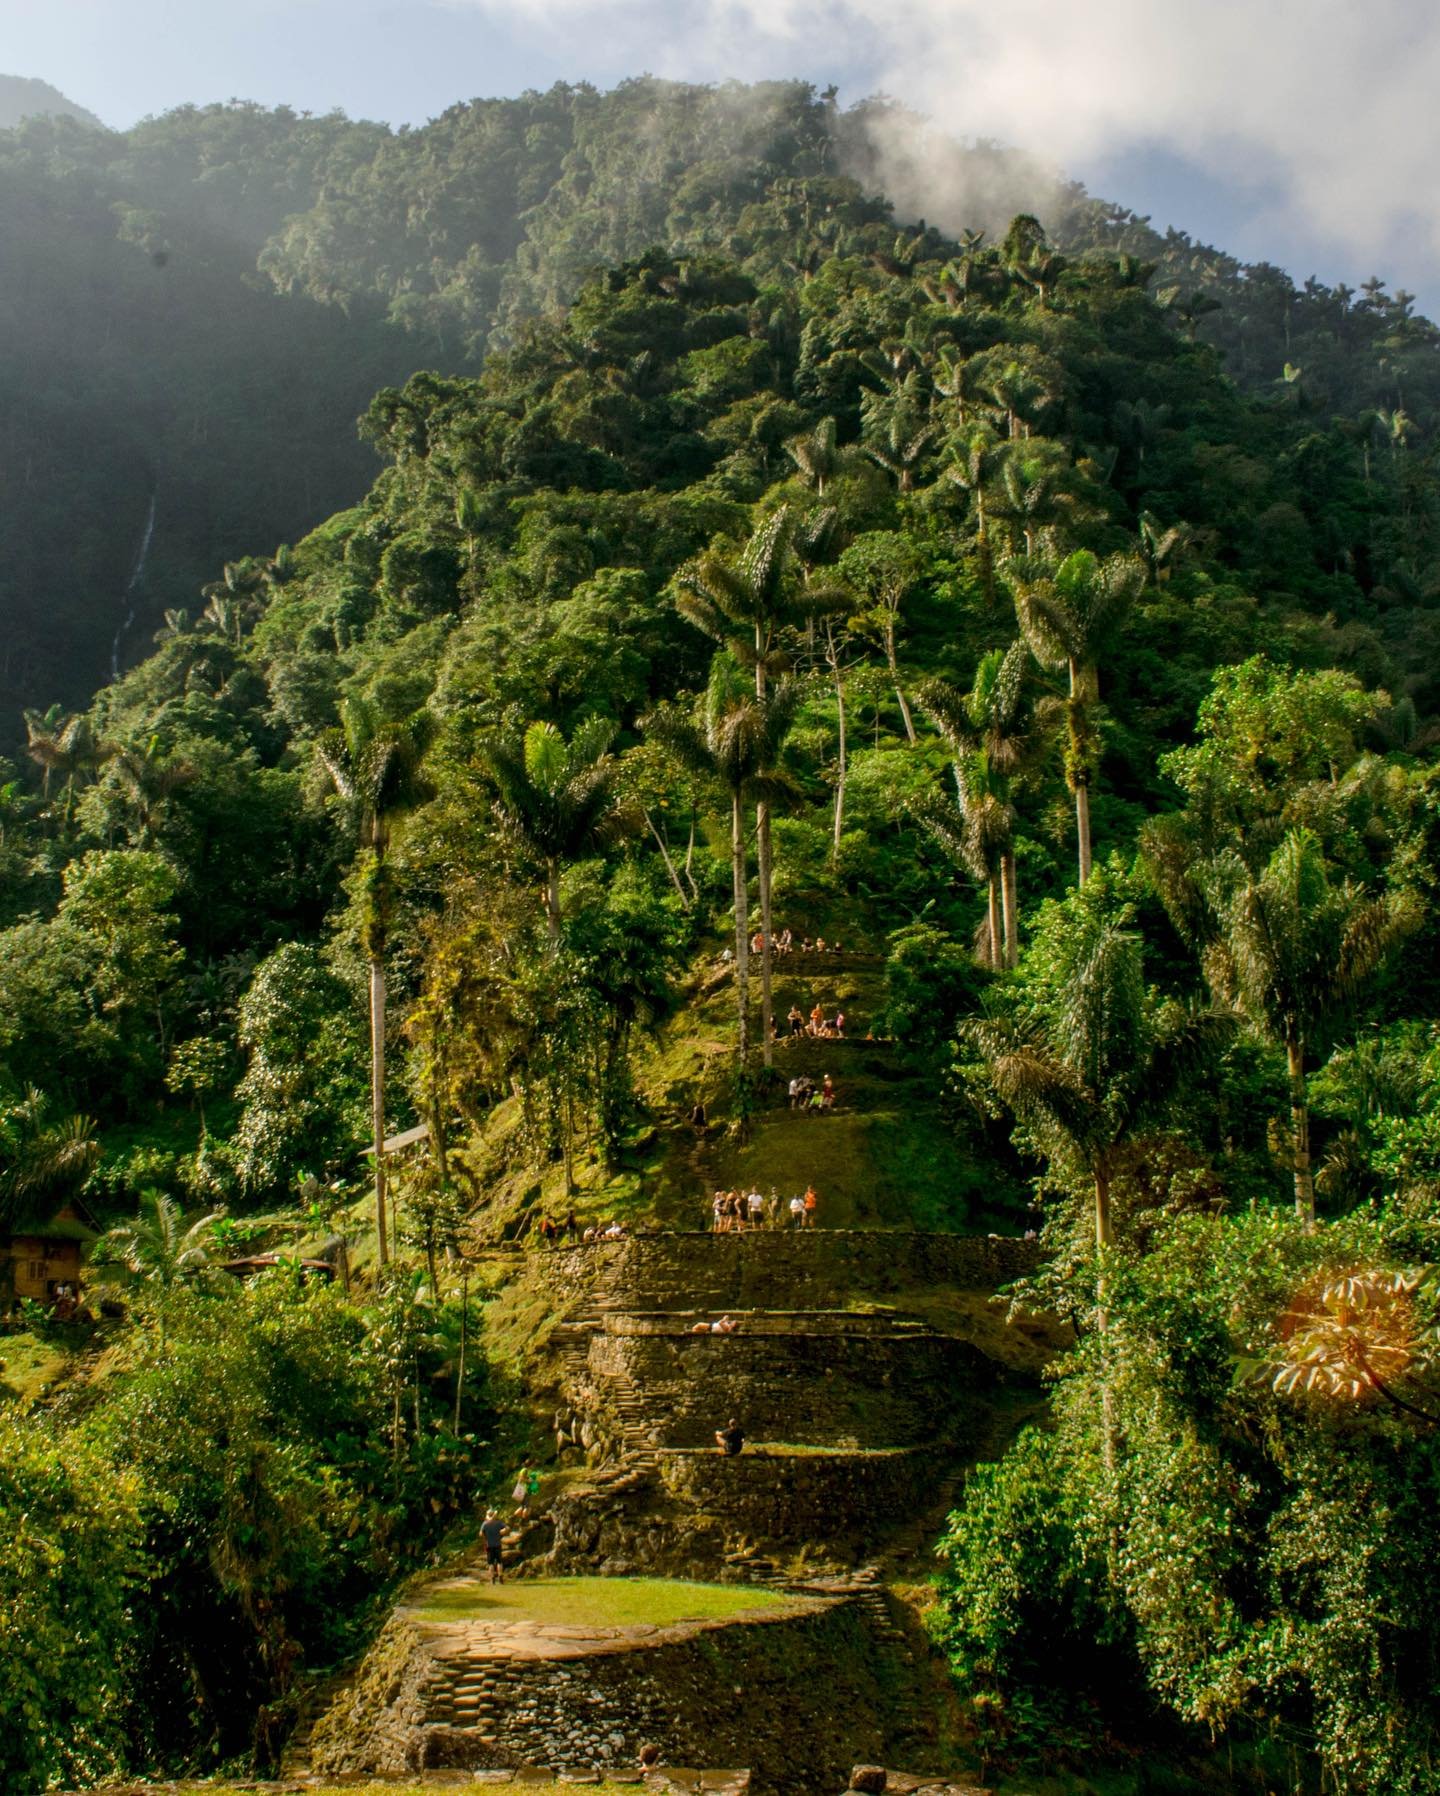 Hey, no excuses for missing out on Colombia&rsquo;s beauty!

There&rsquo;s loads to discover around the river! And the Lost City is one of our top mysteries!

You&rsquo;ll need strong legs and a good attitude (just like her dancing up those steps 💃?